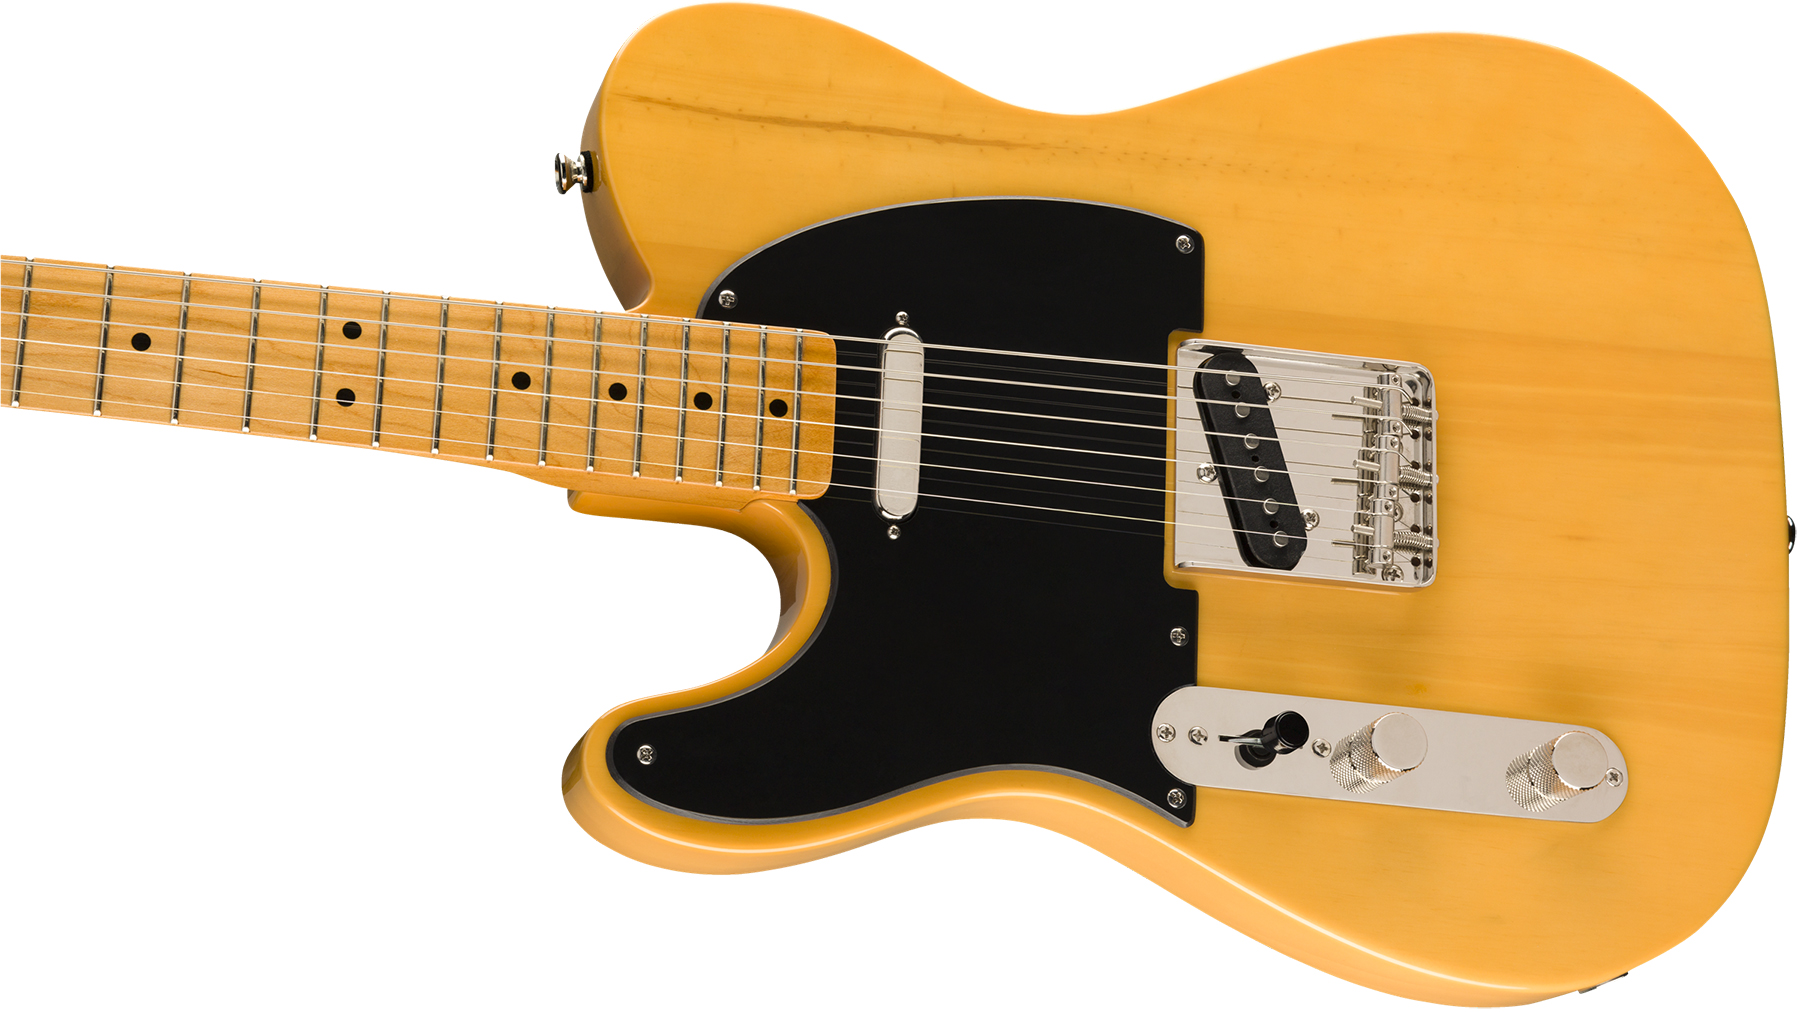 Squier Tele '50s Lh Gaucher Classic Vibe 2019 Mn 2019 - Butterscotch Blonde - Left-handed electric guitar - Variation 2